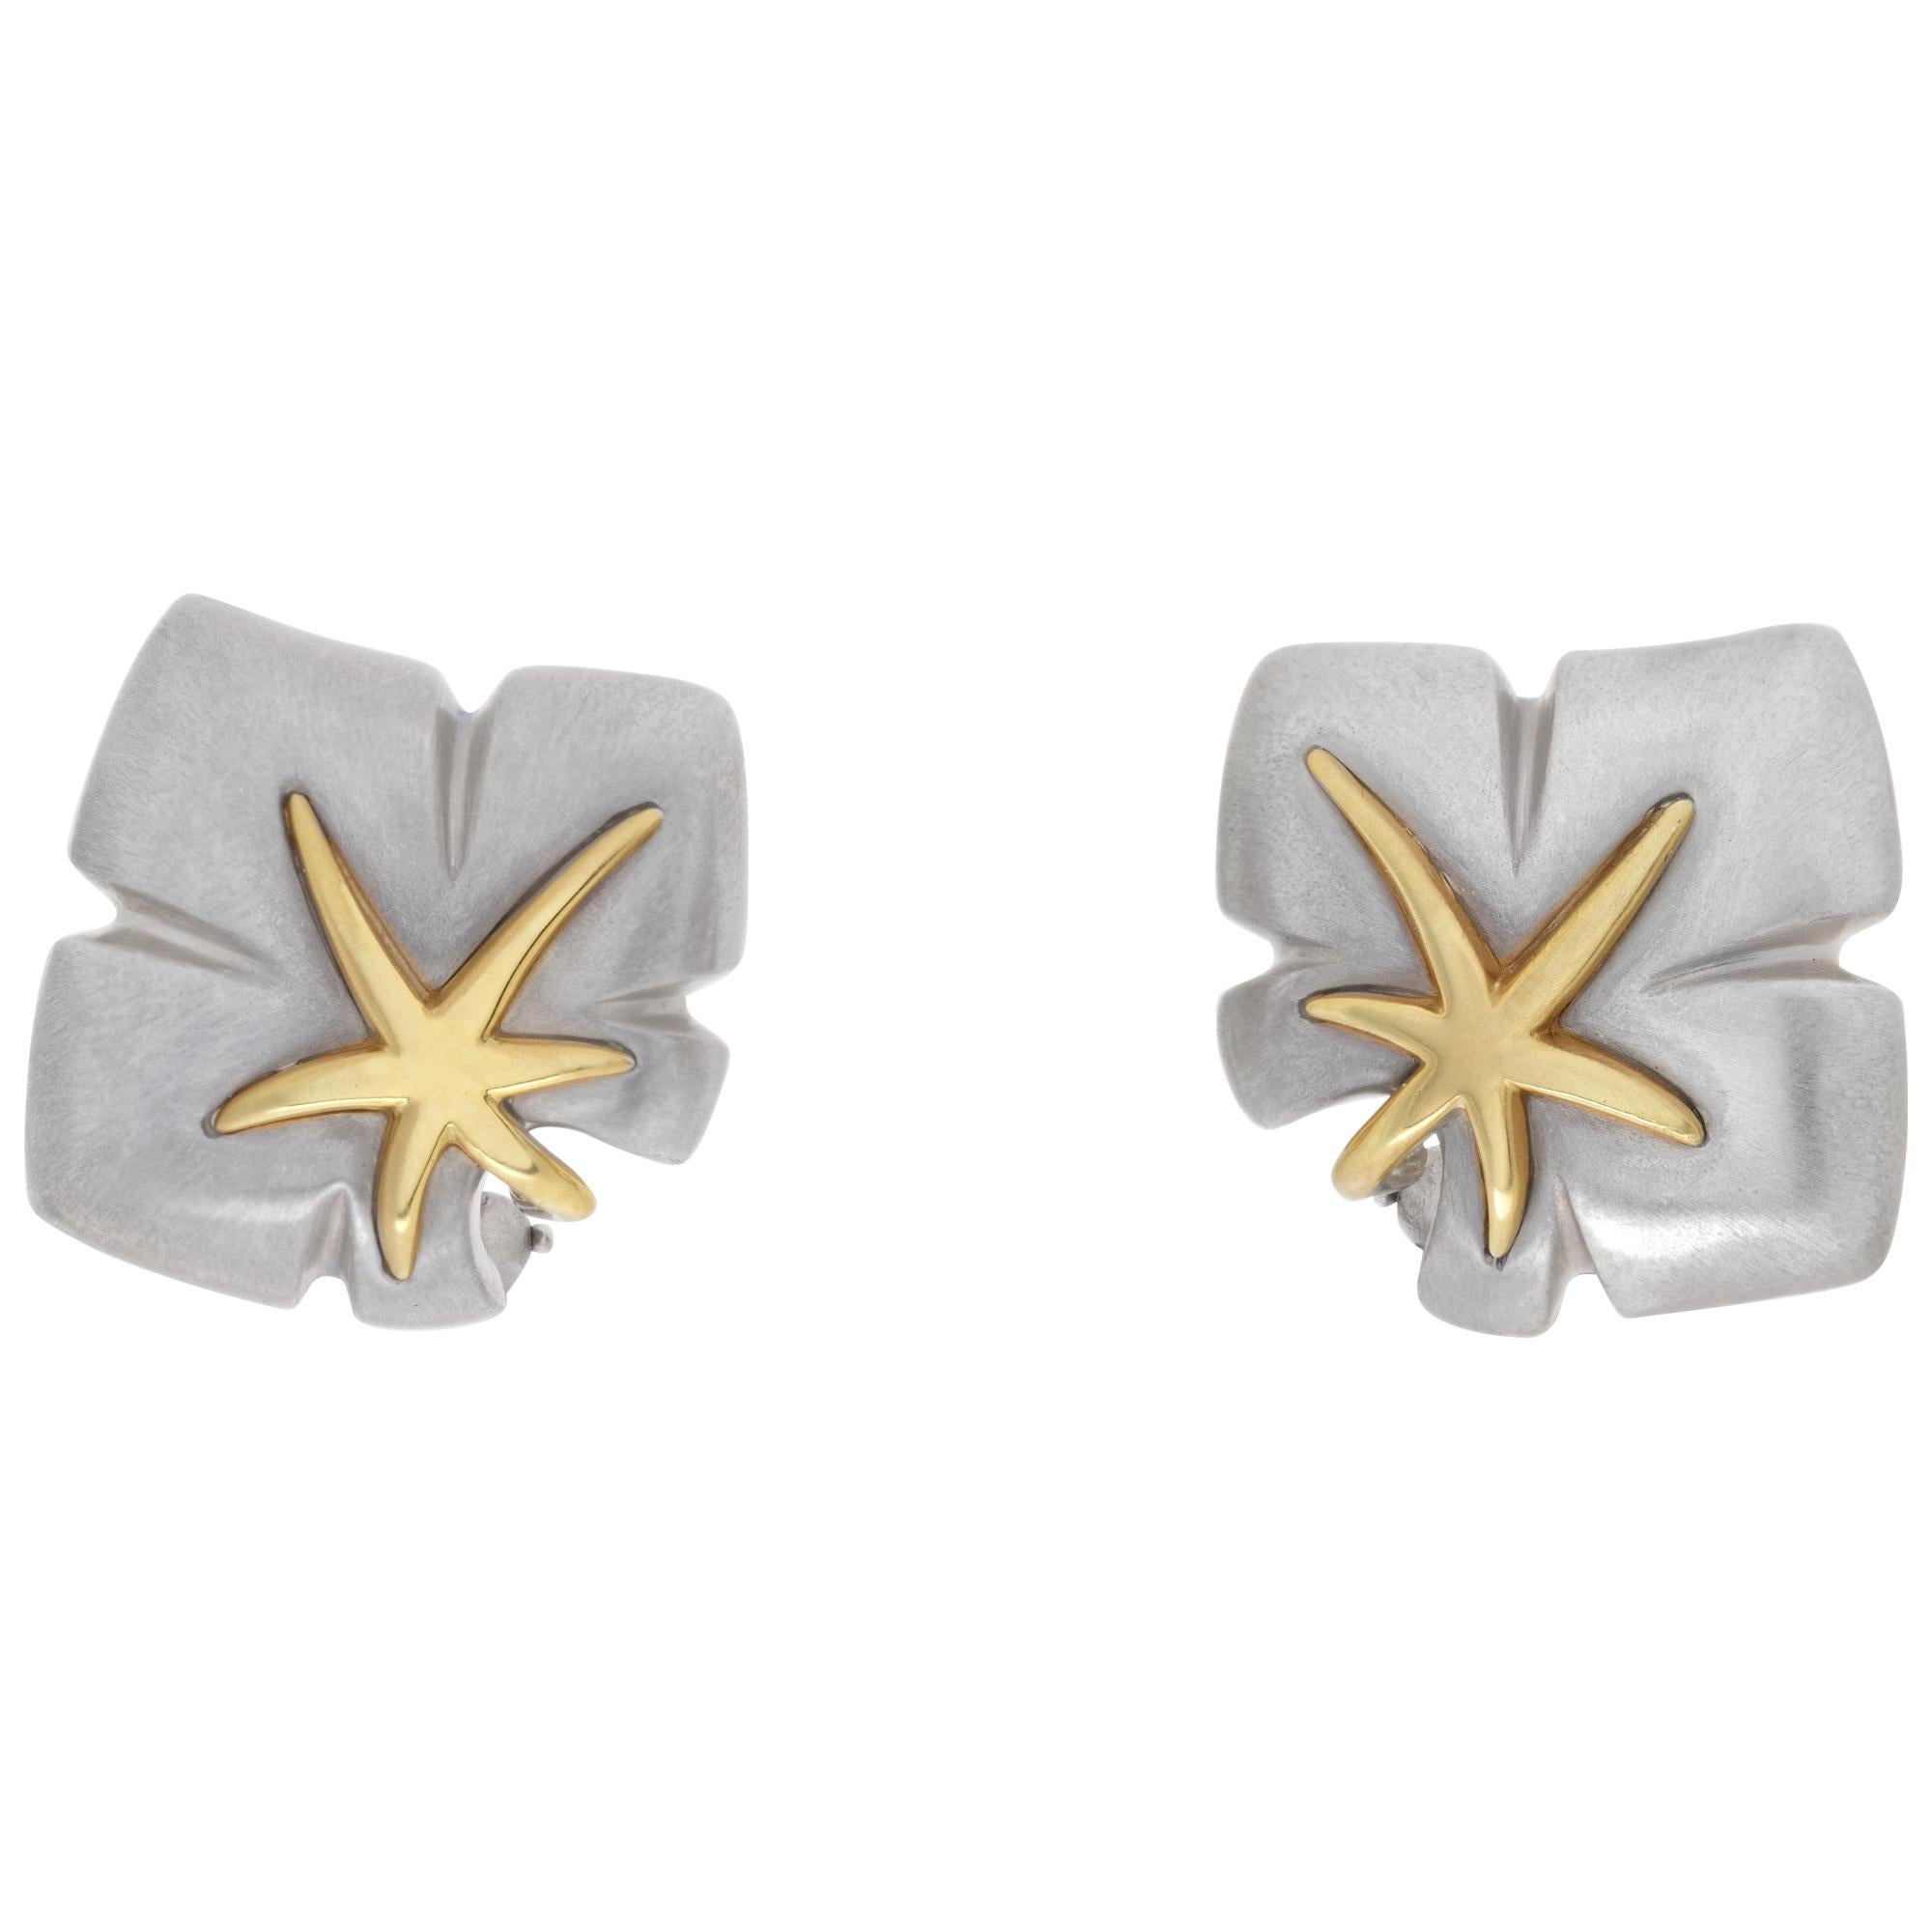 Earrings with 18k Yellow Gold Accents, Tiffany & Co. Silver Maple Leaf Design For Sale